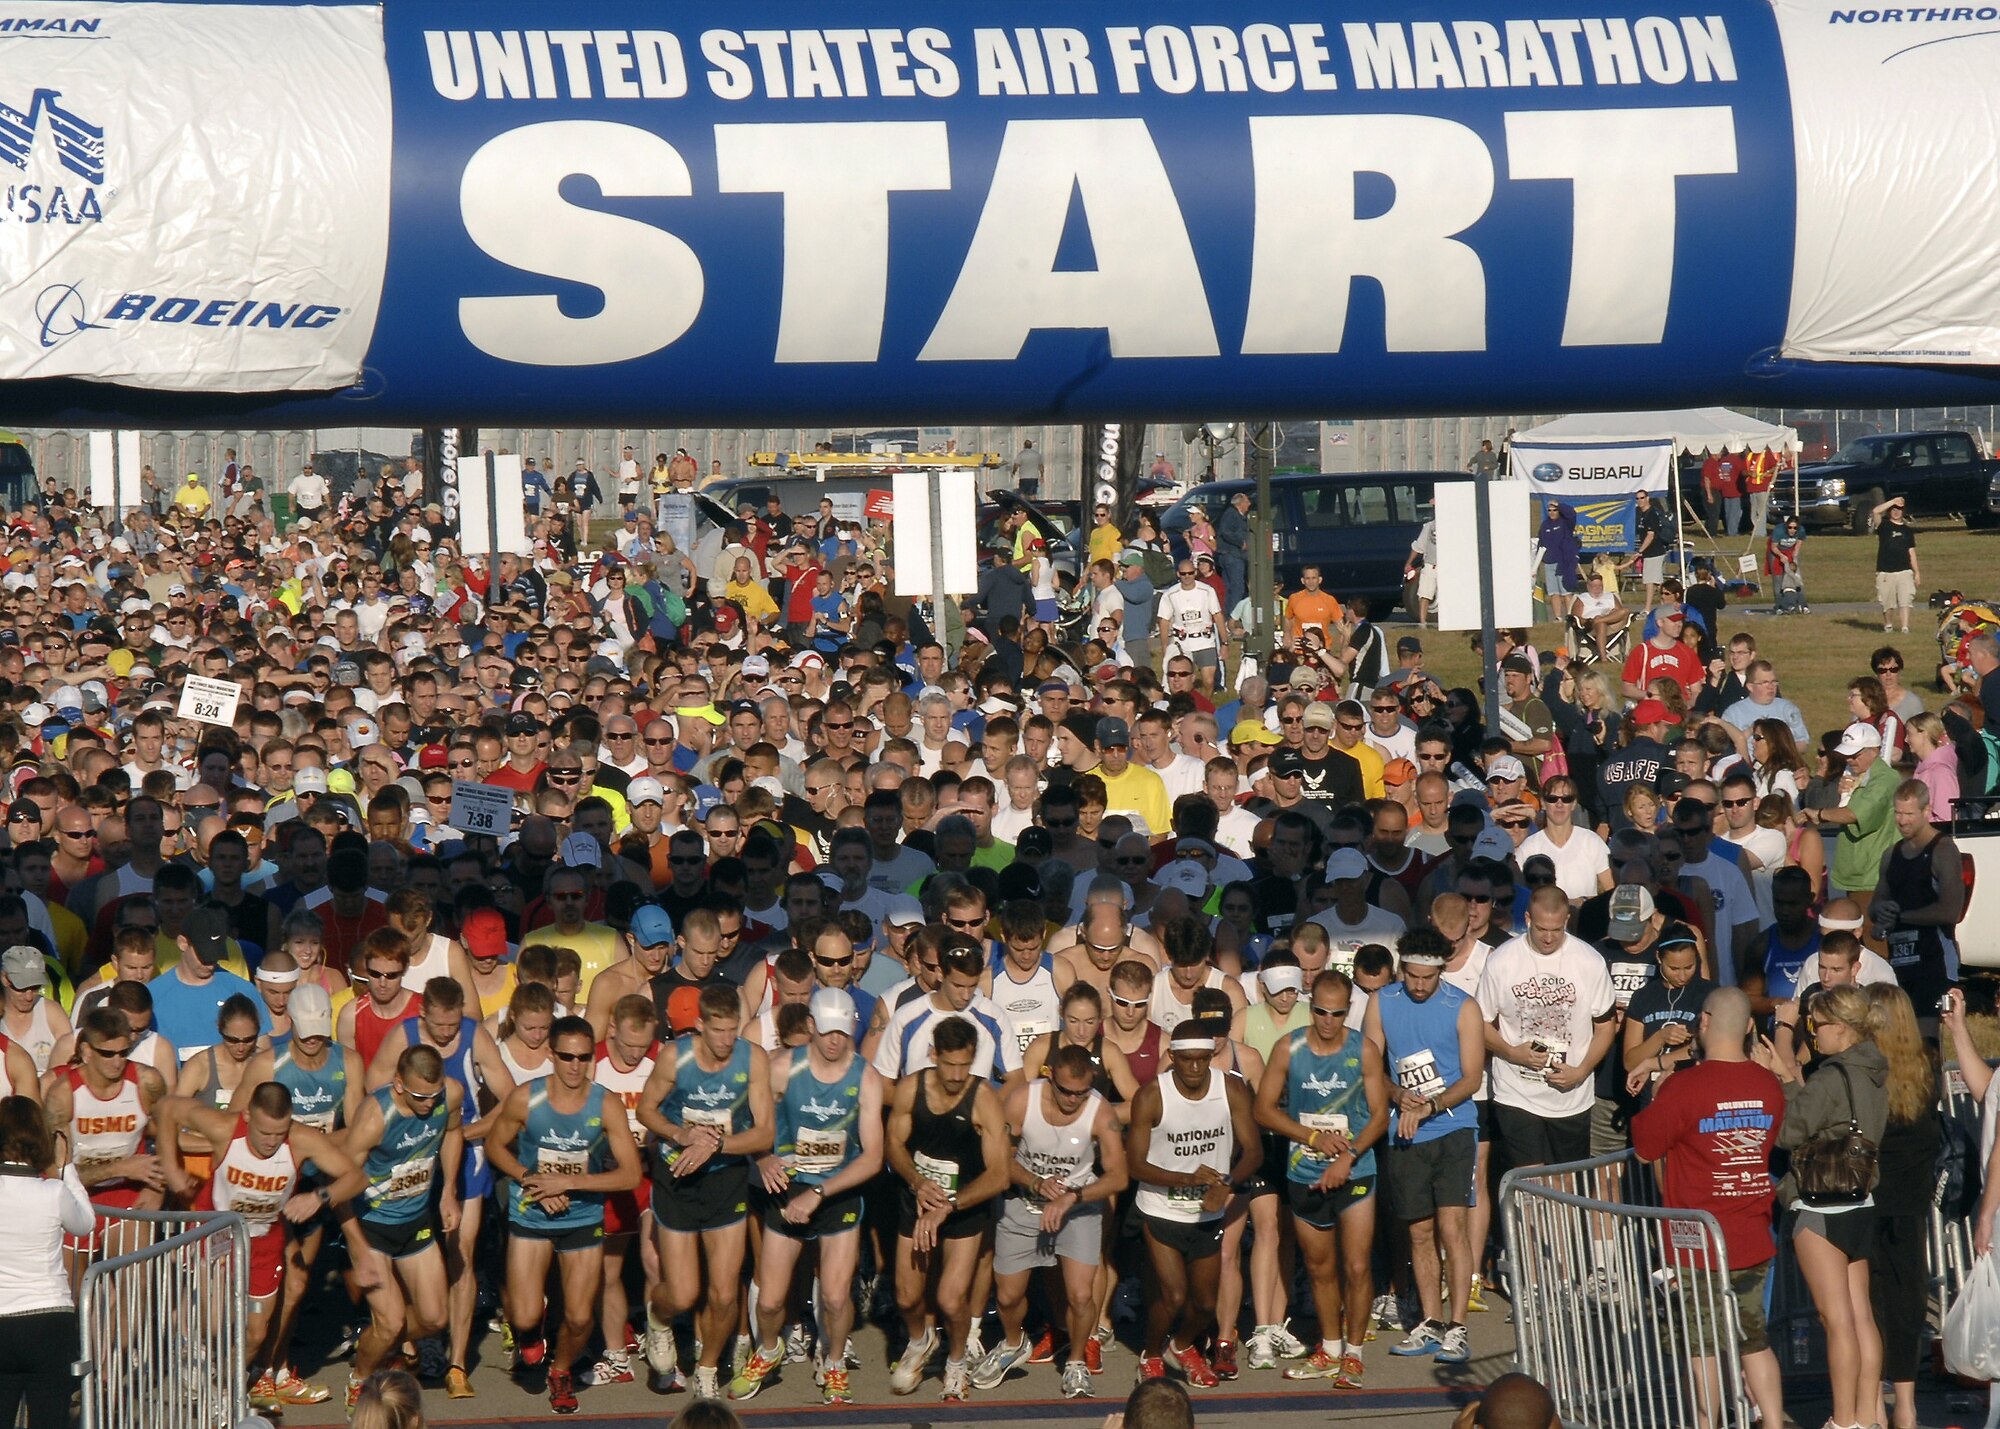 Thousands of runners start the half-marathon during the Air Force Marathon Sept. 18, 2010 at Wright-Patterson Air Force Base, Ohio.  A record breaking12,000 runners registered for the events held on Sept. 17-18.  (U.S. Air Force Photo/Michelle Gigante)